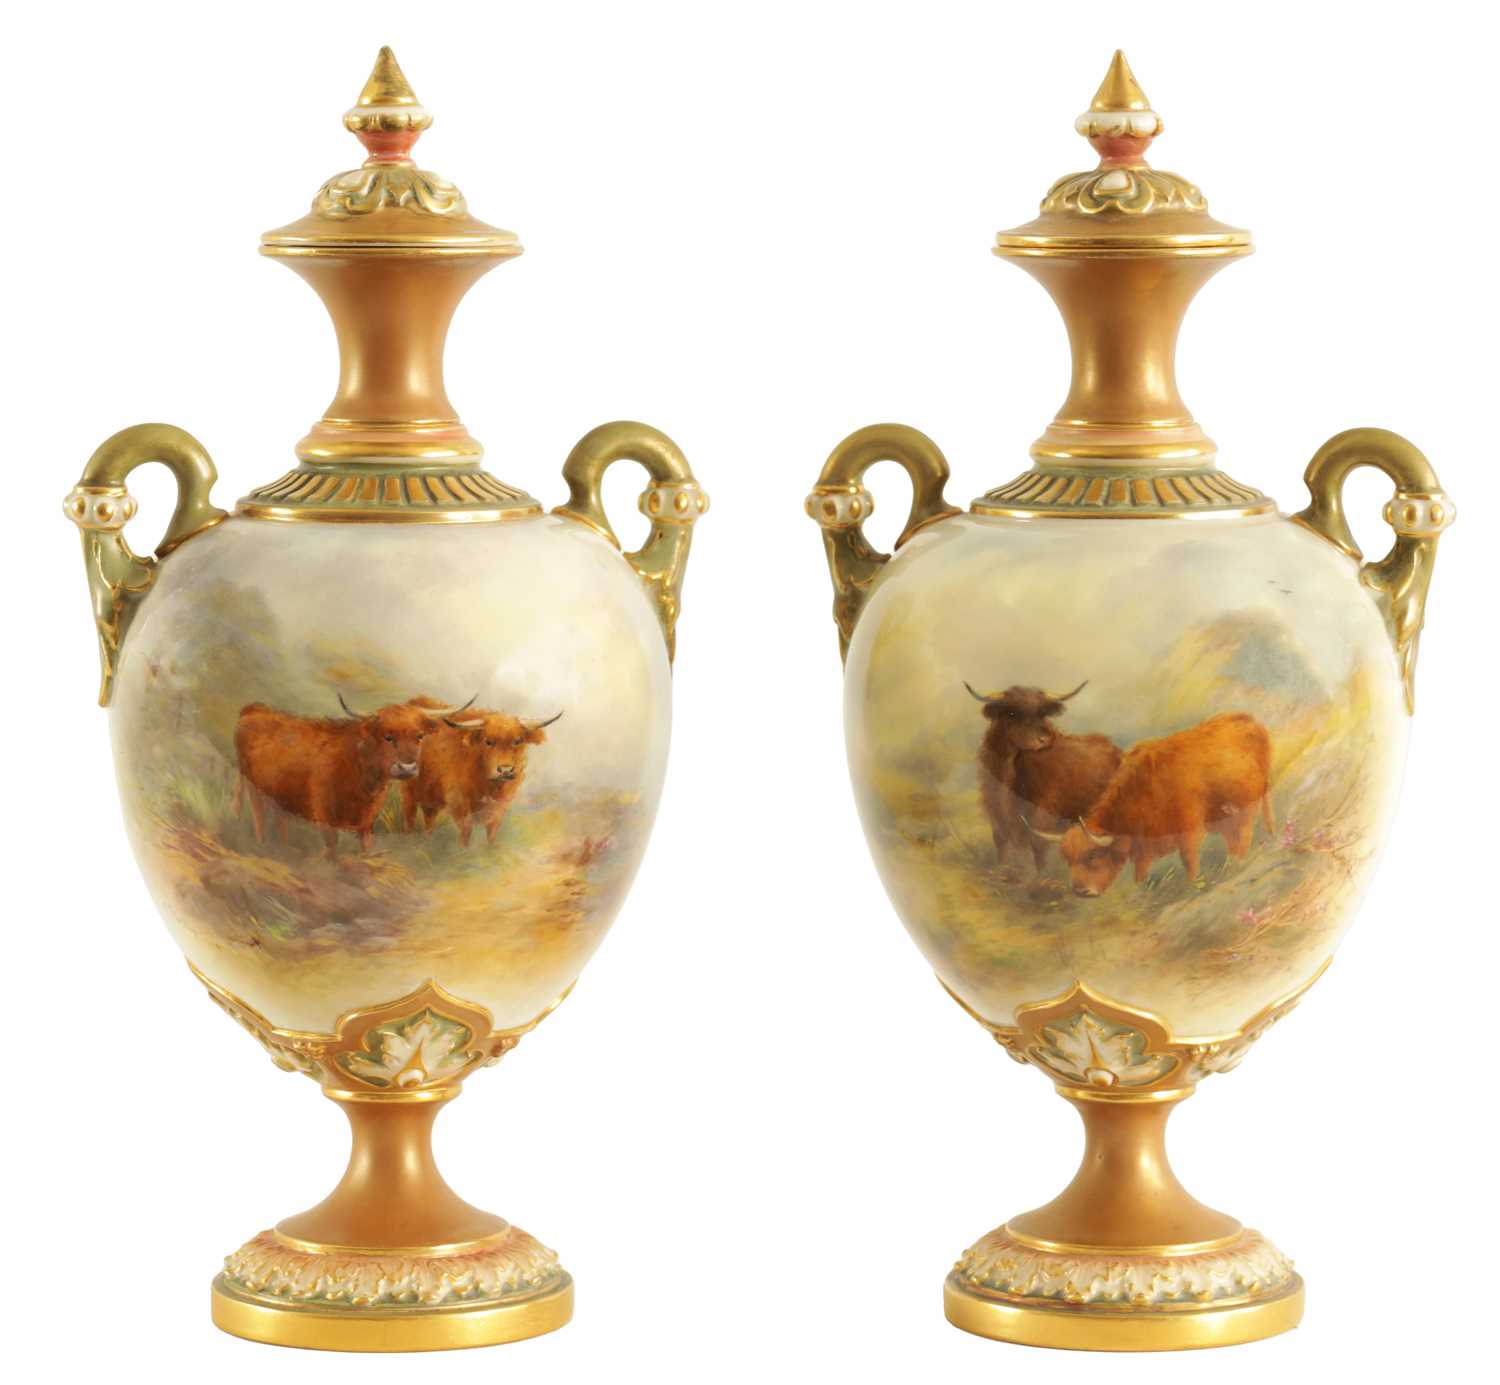 Lot 43 - HARRY STINTON. A FINE PAIR OF ROYAL WORCESTER OVOID PEDESTAL CABINET VASES AND COVERS